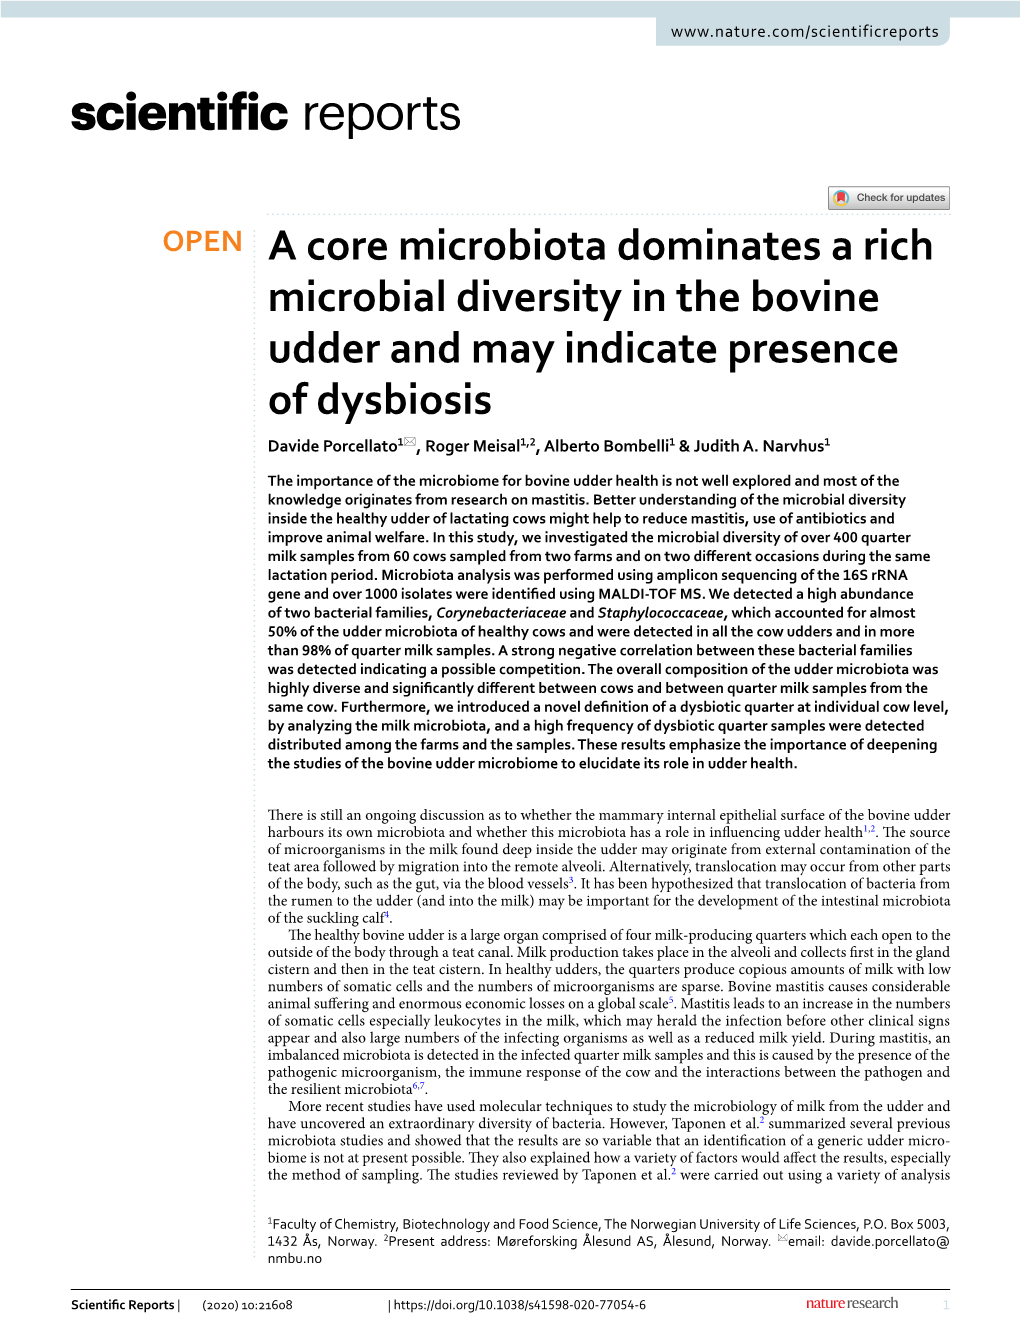 A Core Microbiota Dominates a Rich Microbial Diversity in the Bovine Udder and May Indicate Presence of Dysbiosis